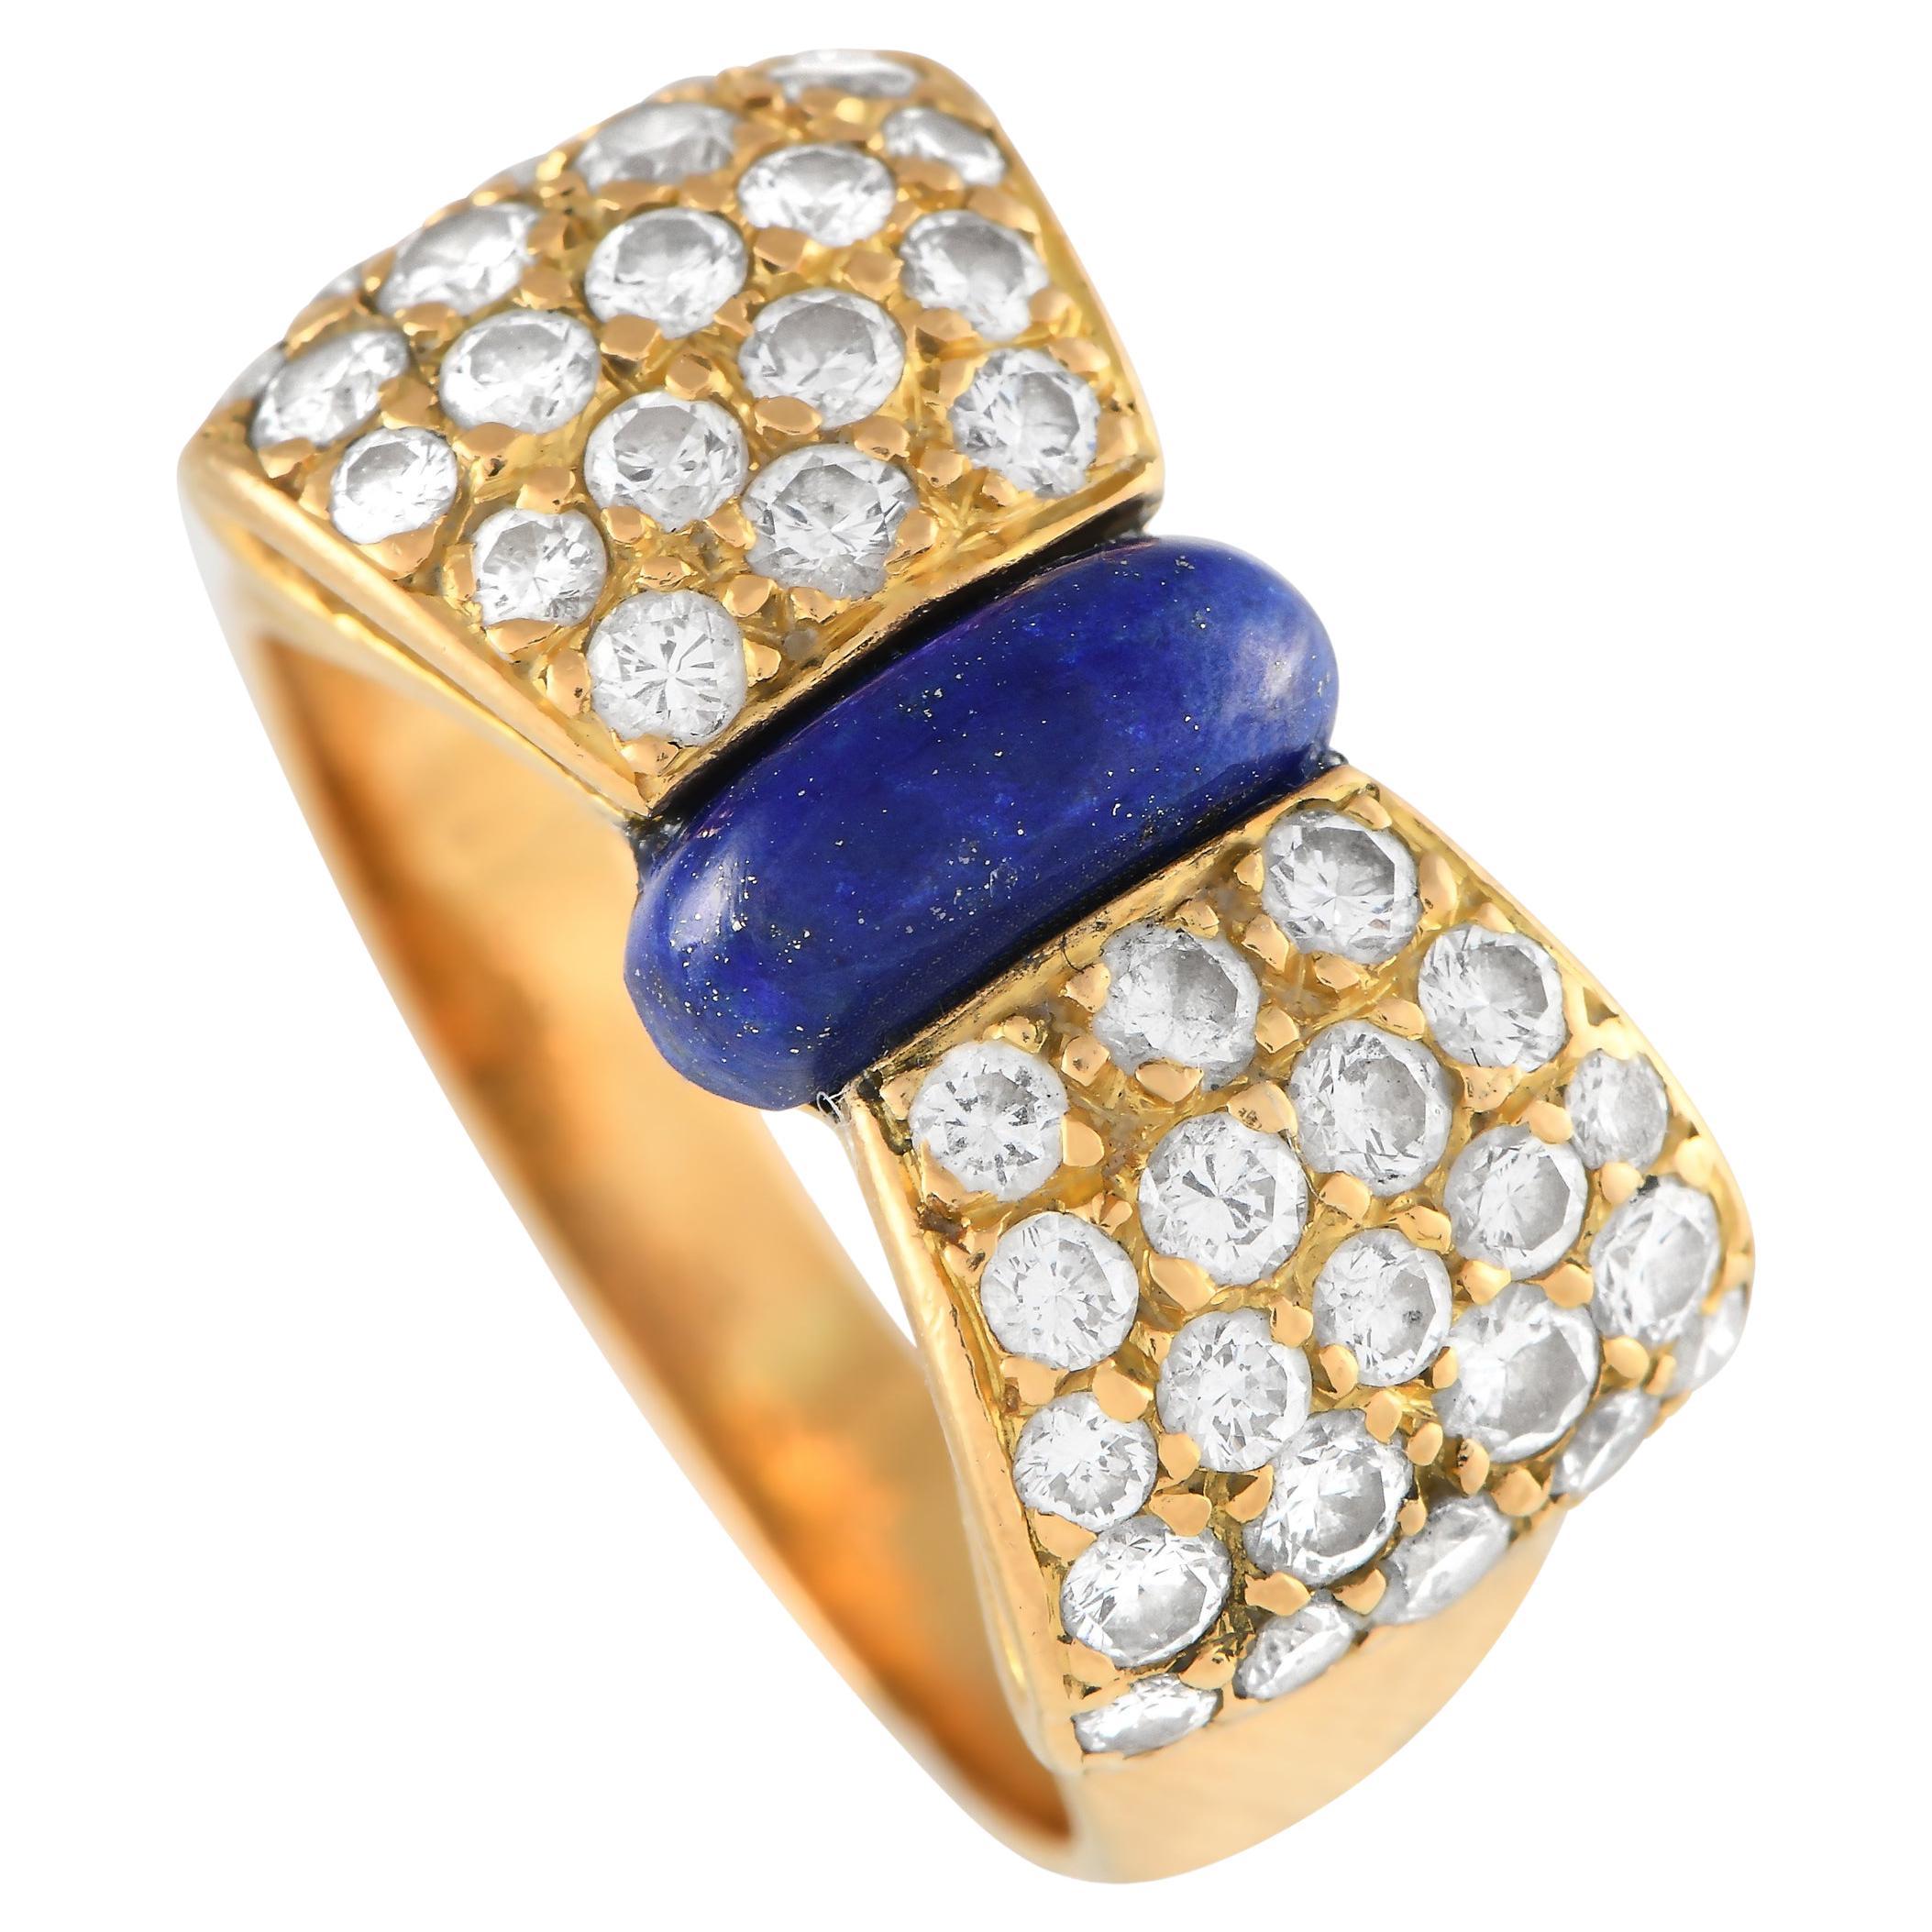 Van Cleef & Arpels 18K Yellow Gold 0.85ct Diamond and Lapis Lazuli Bow Ring For Sale